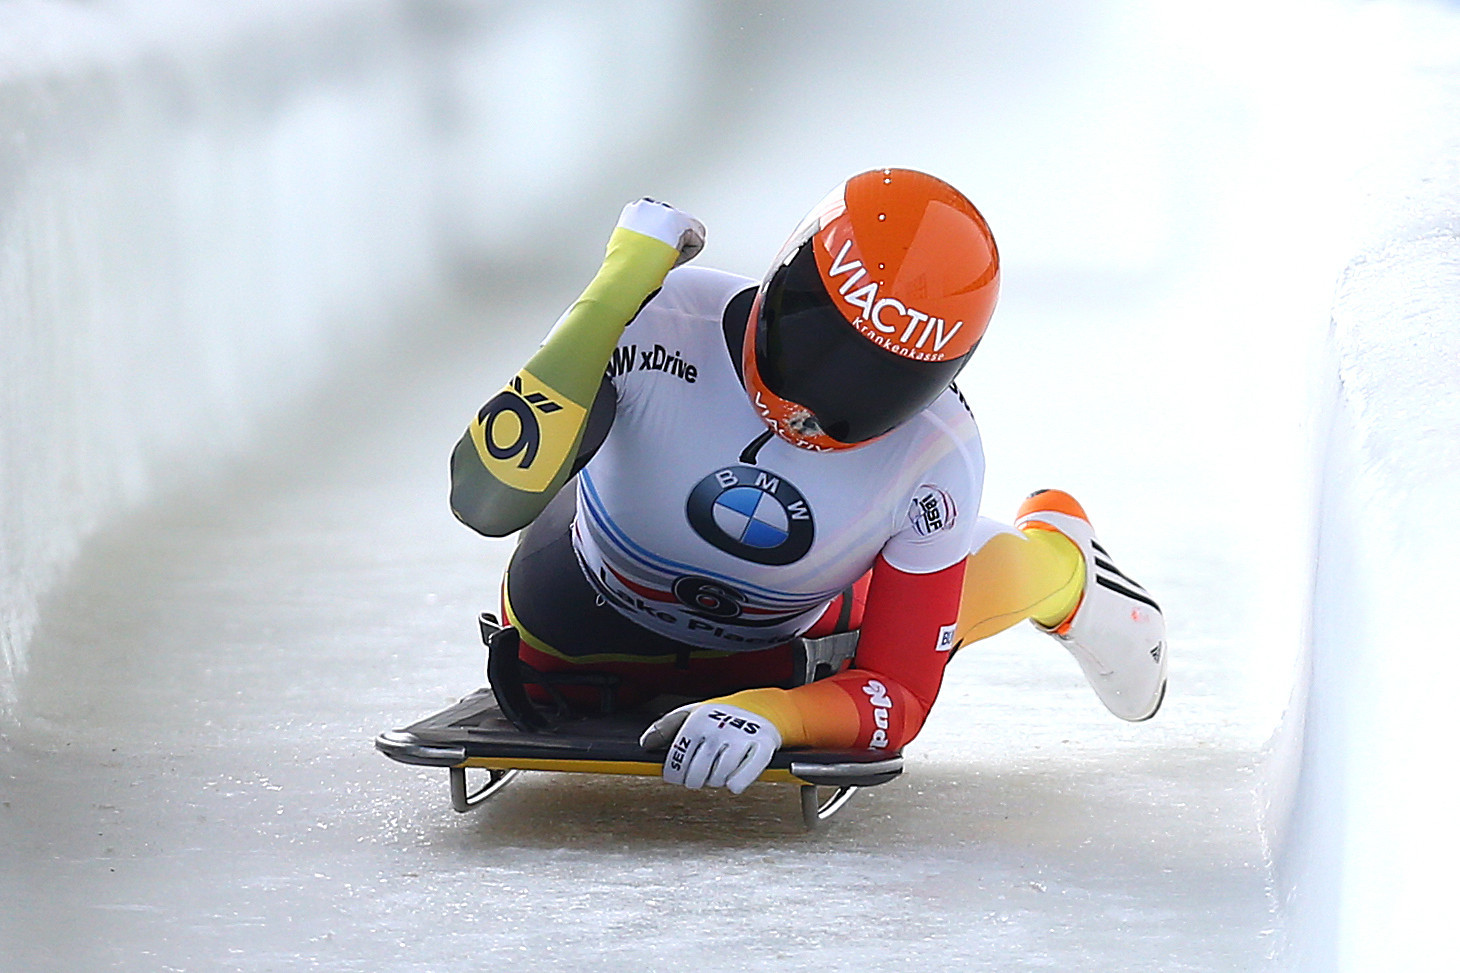 Dirk Matschenz oversaw a strong German skeleton team over the past two years ©Getty Images